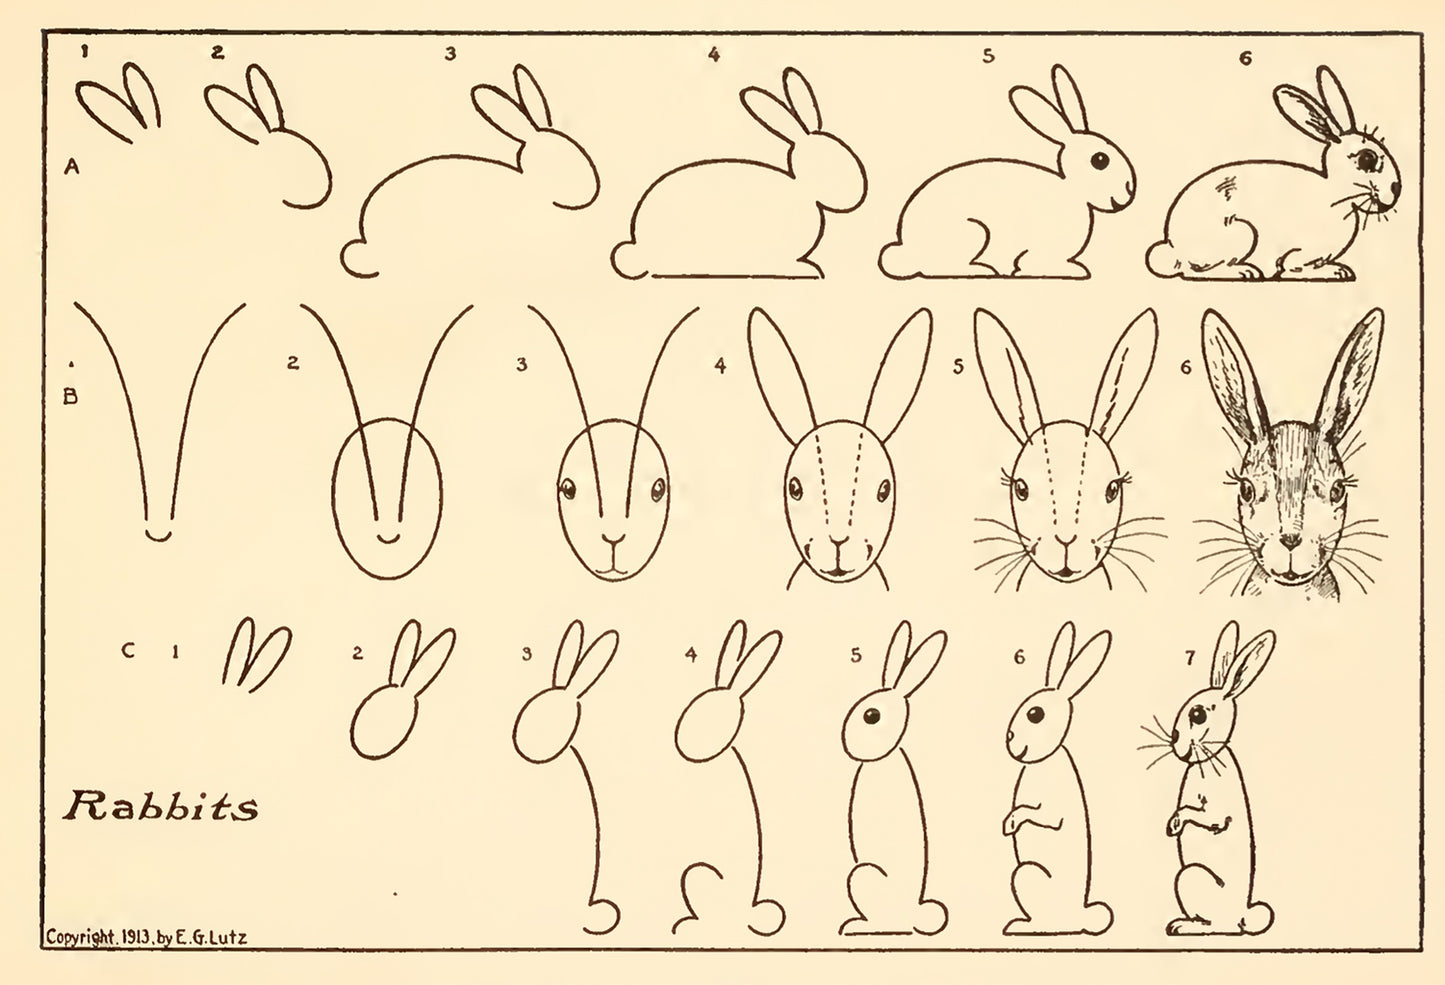 How To Draw Rabbits by Edwin Lutz, 1913 - Postcard